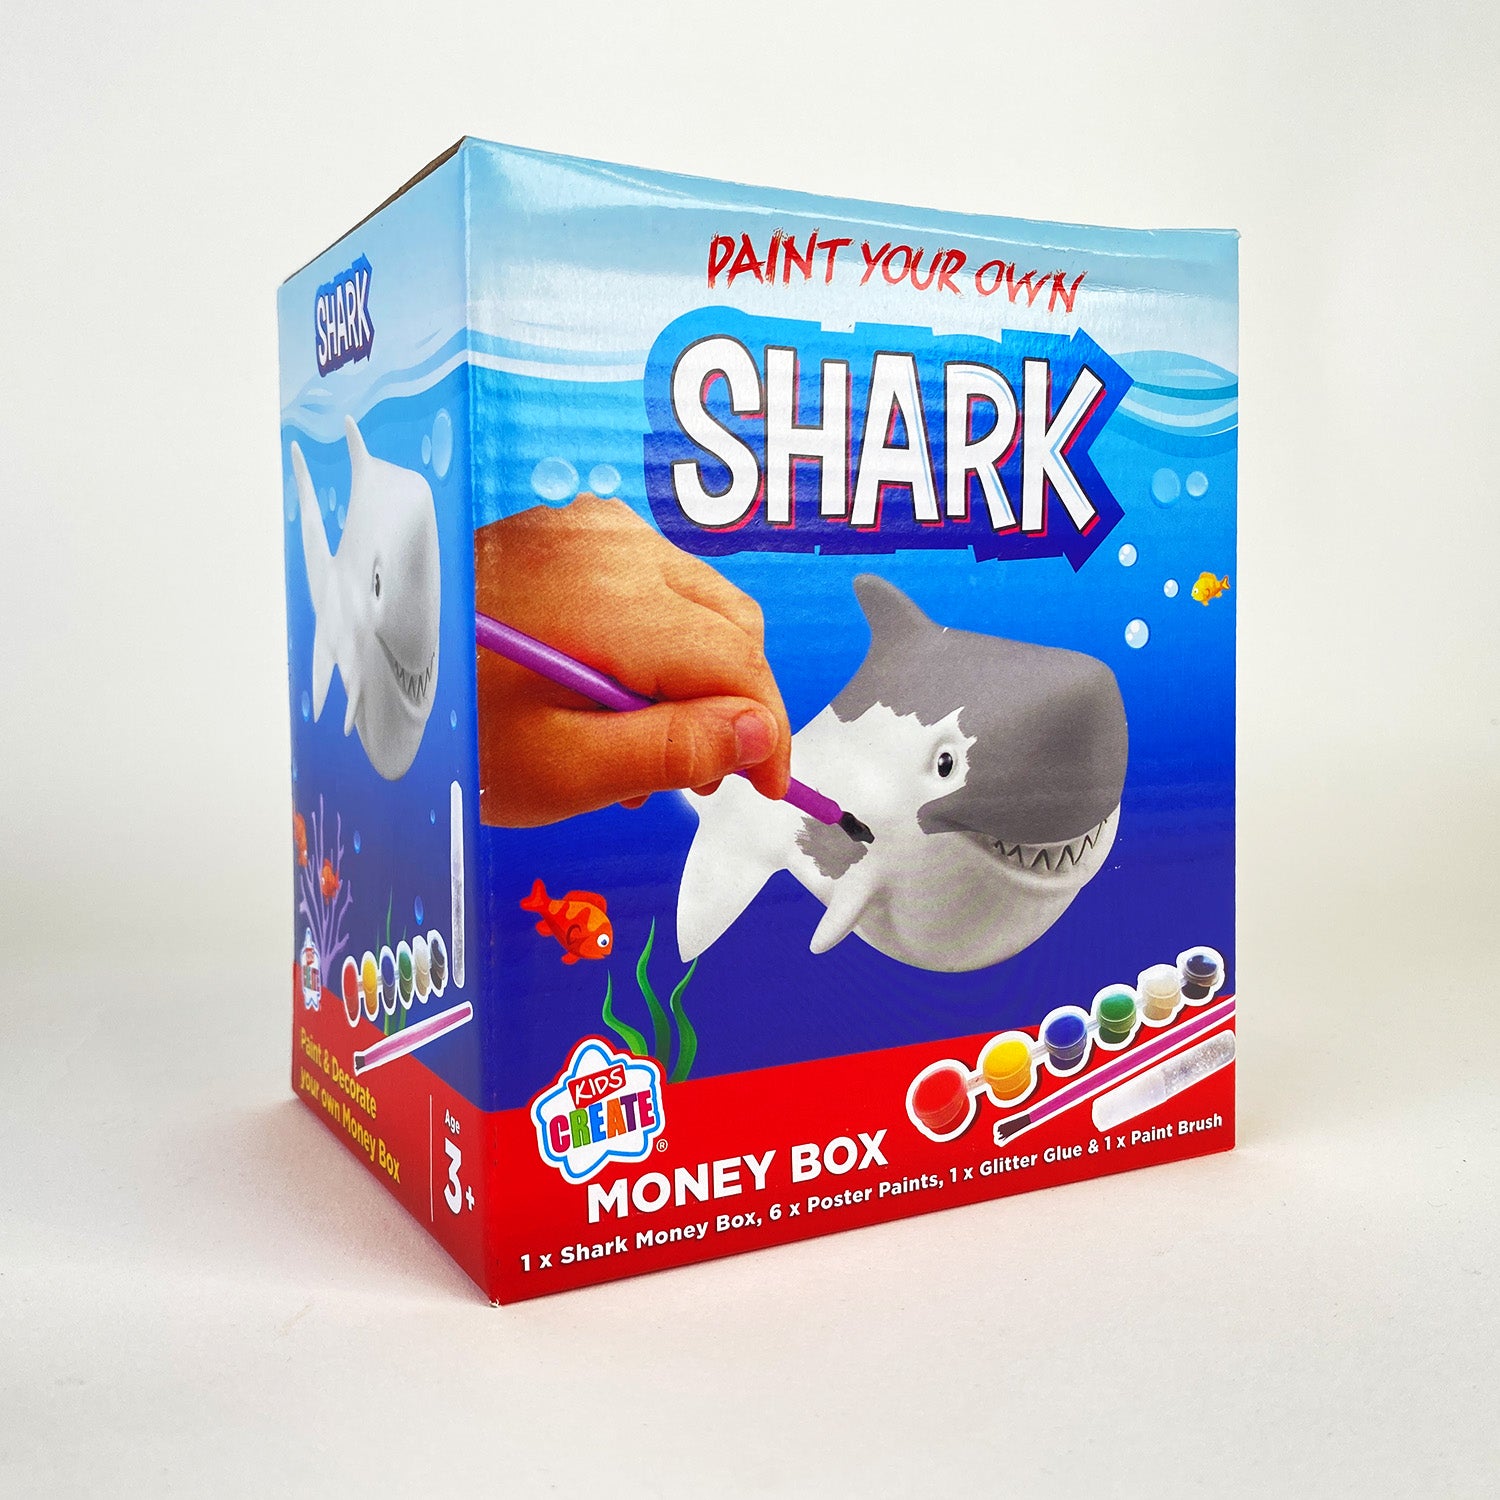 Paint Your Own Money Box - Shark or Robot